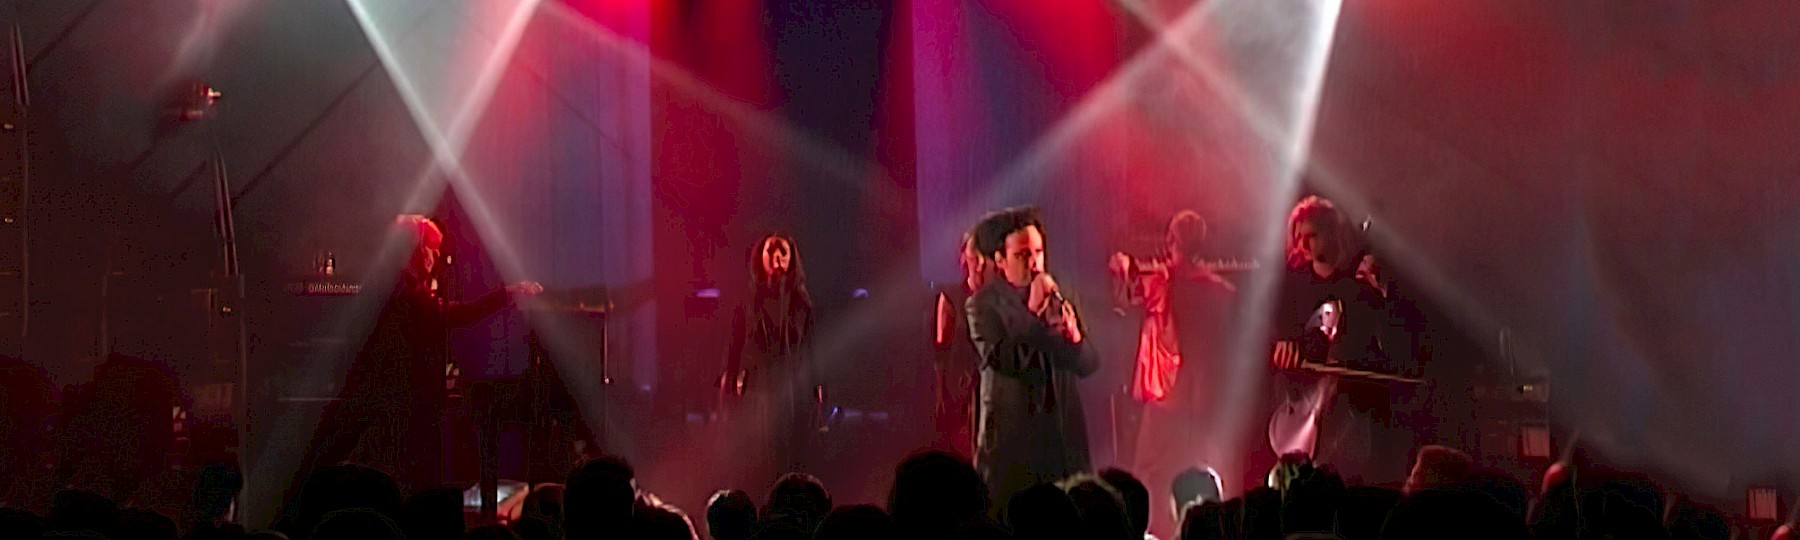 Live in Concert DVD